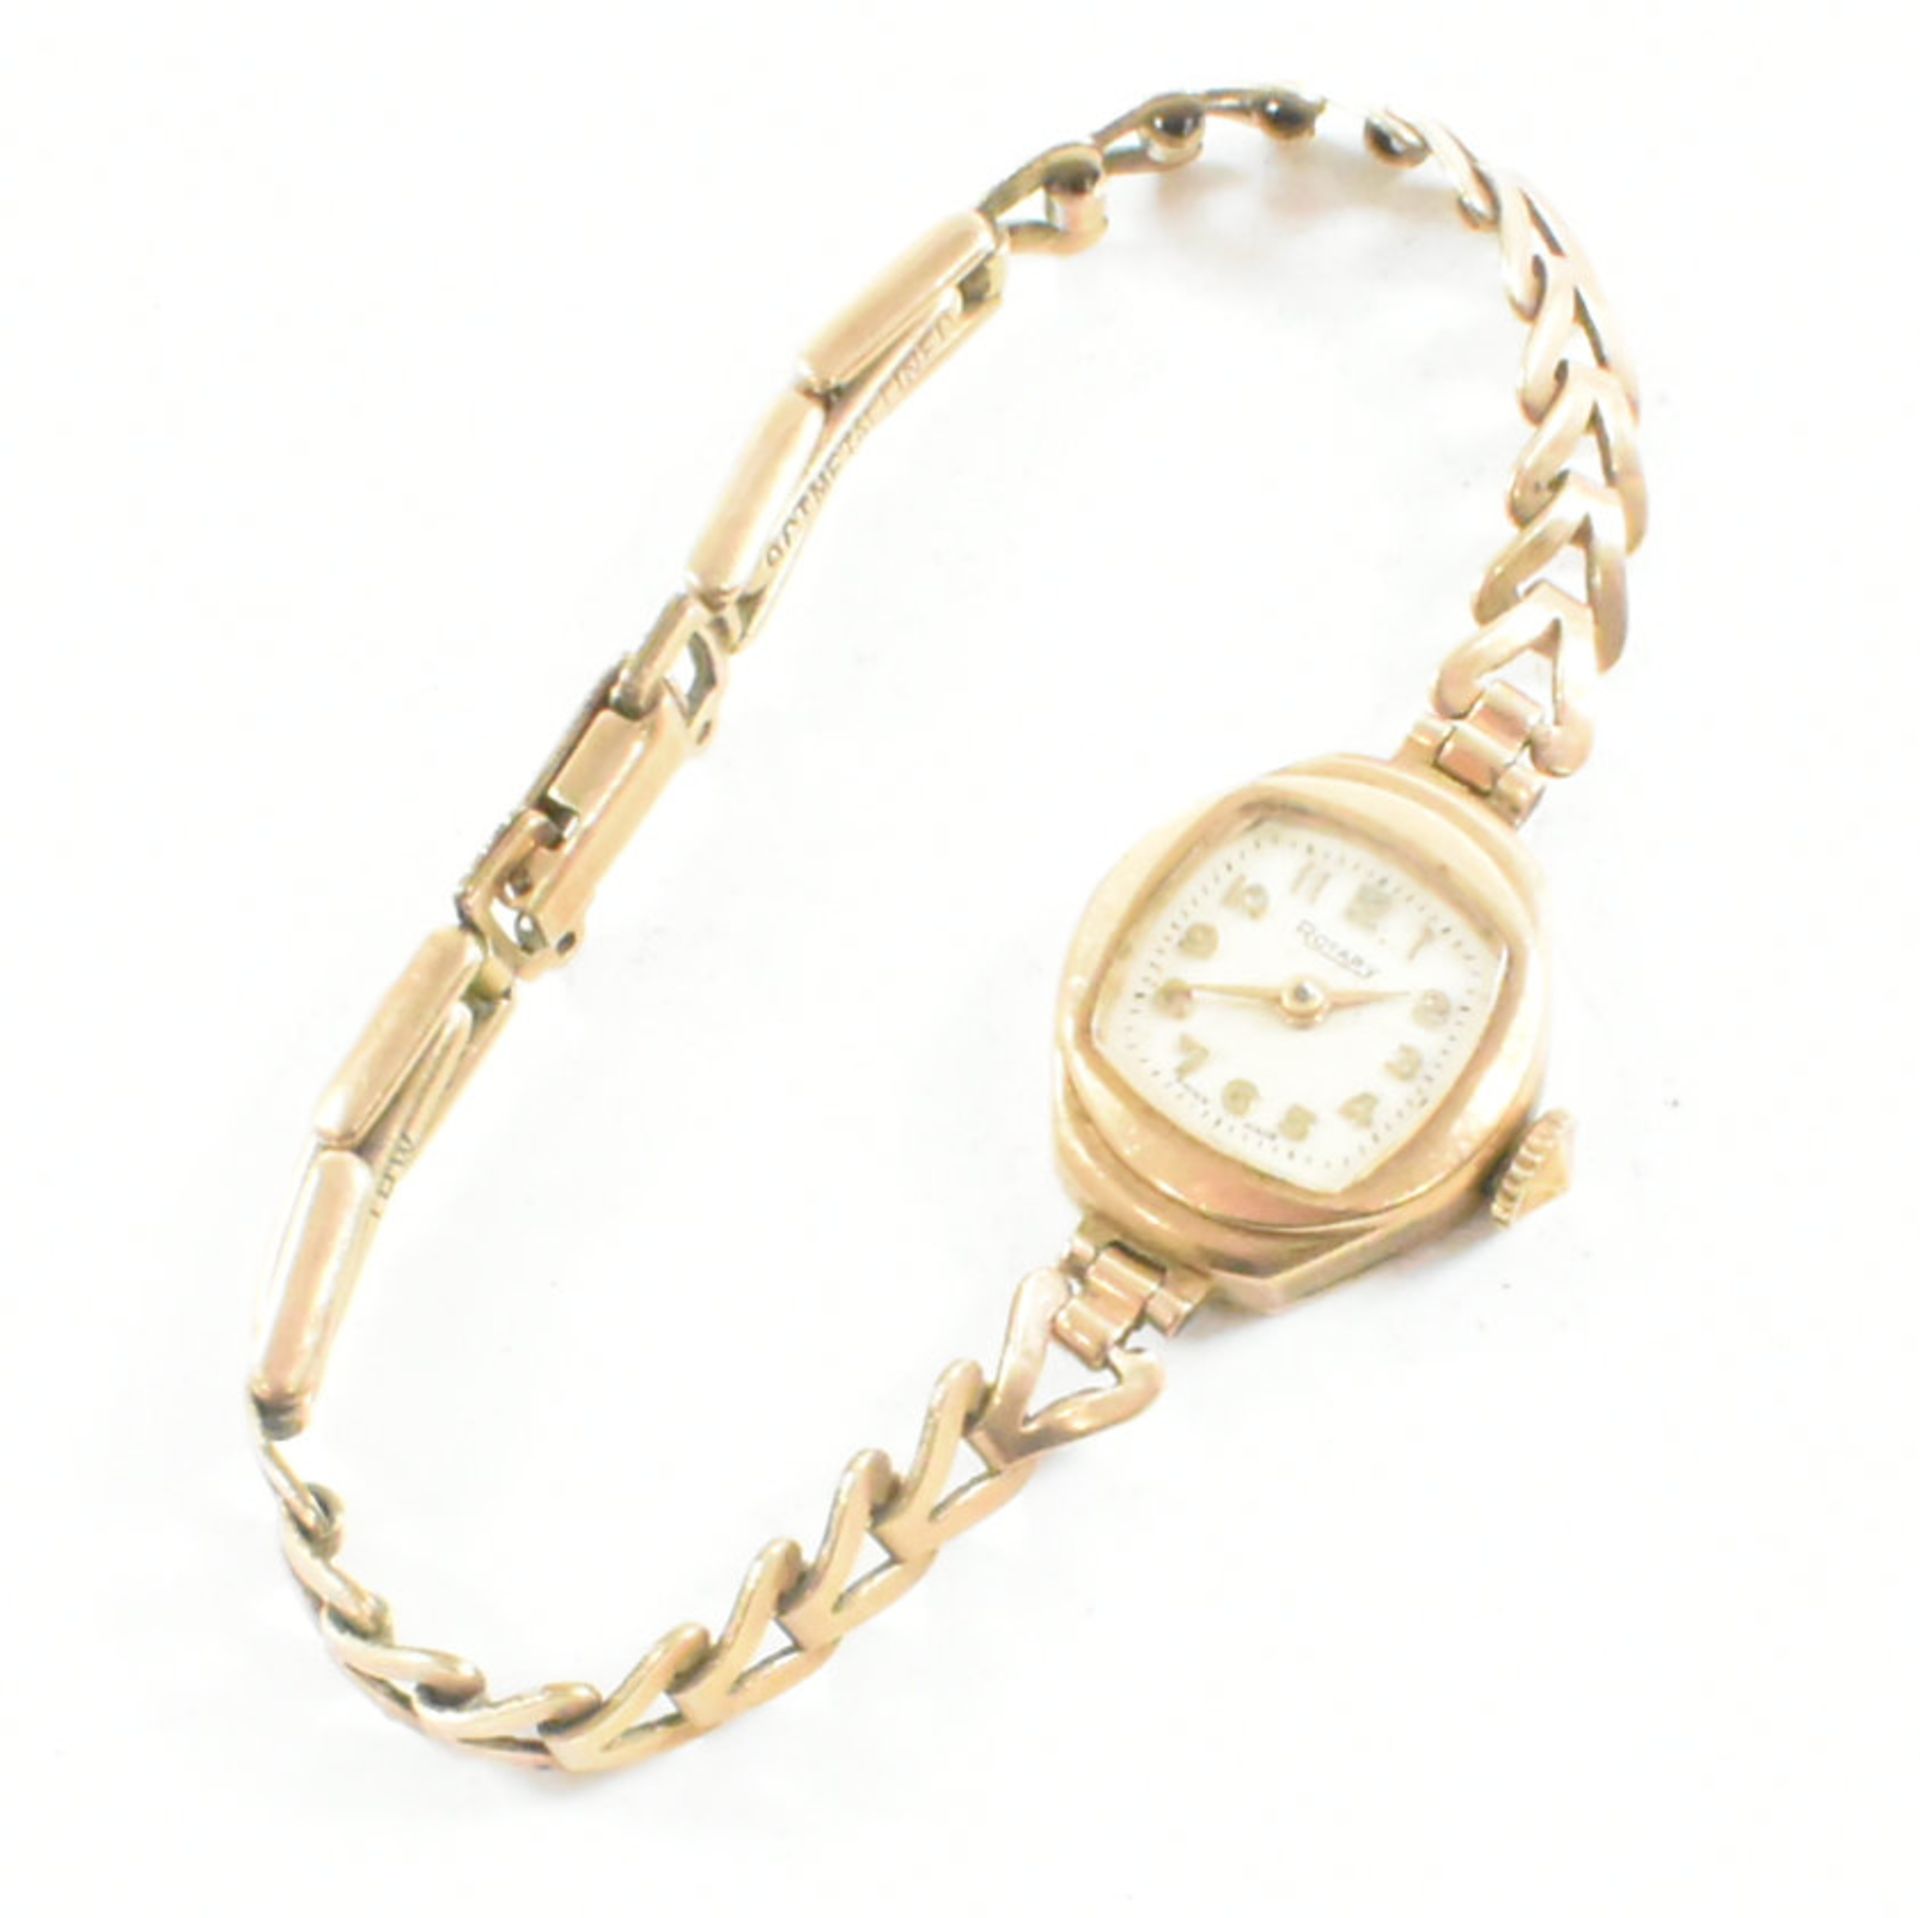 1960S HALLMARKED 9CT GOLD ROTARY WATCH WITH METAL LINED STRAP - Image 8 of 11